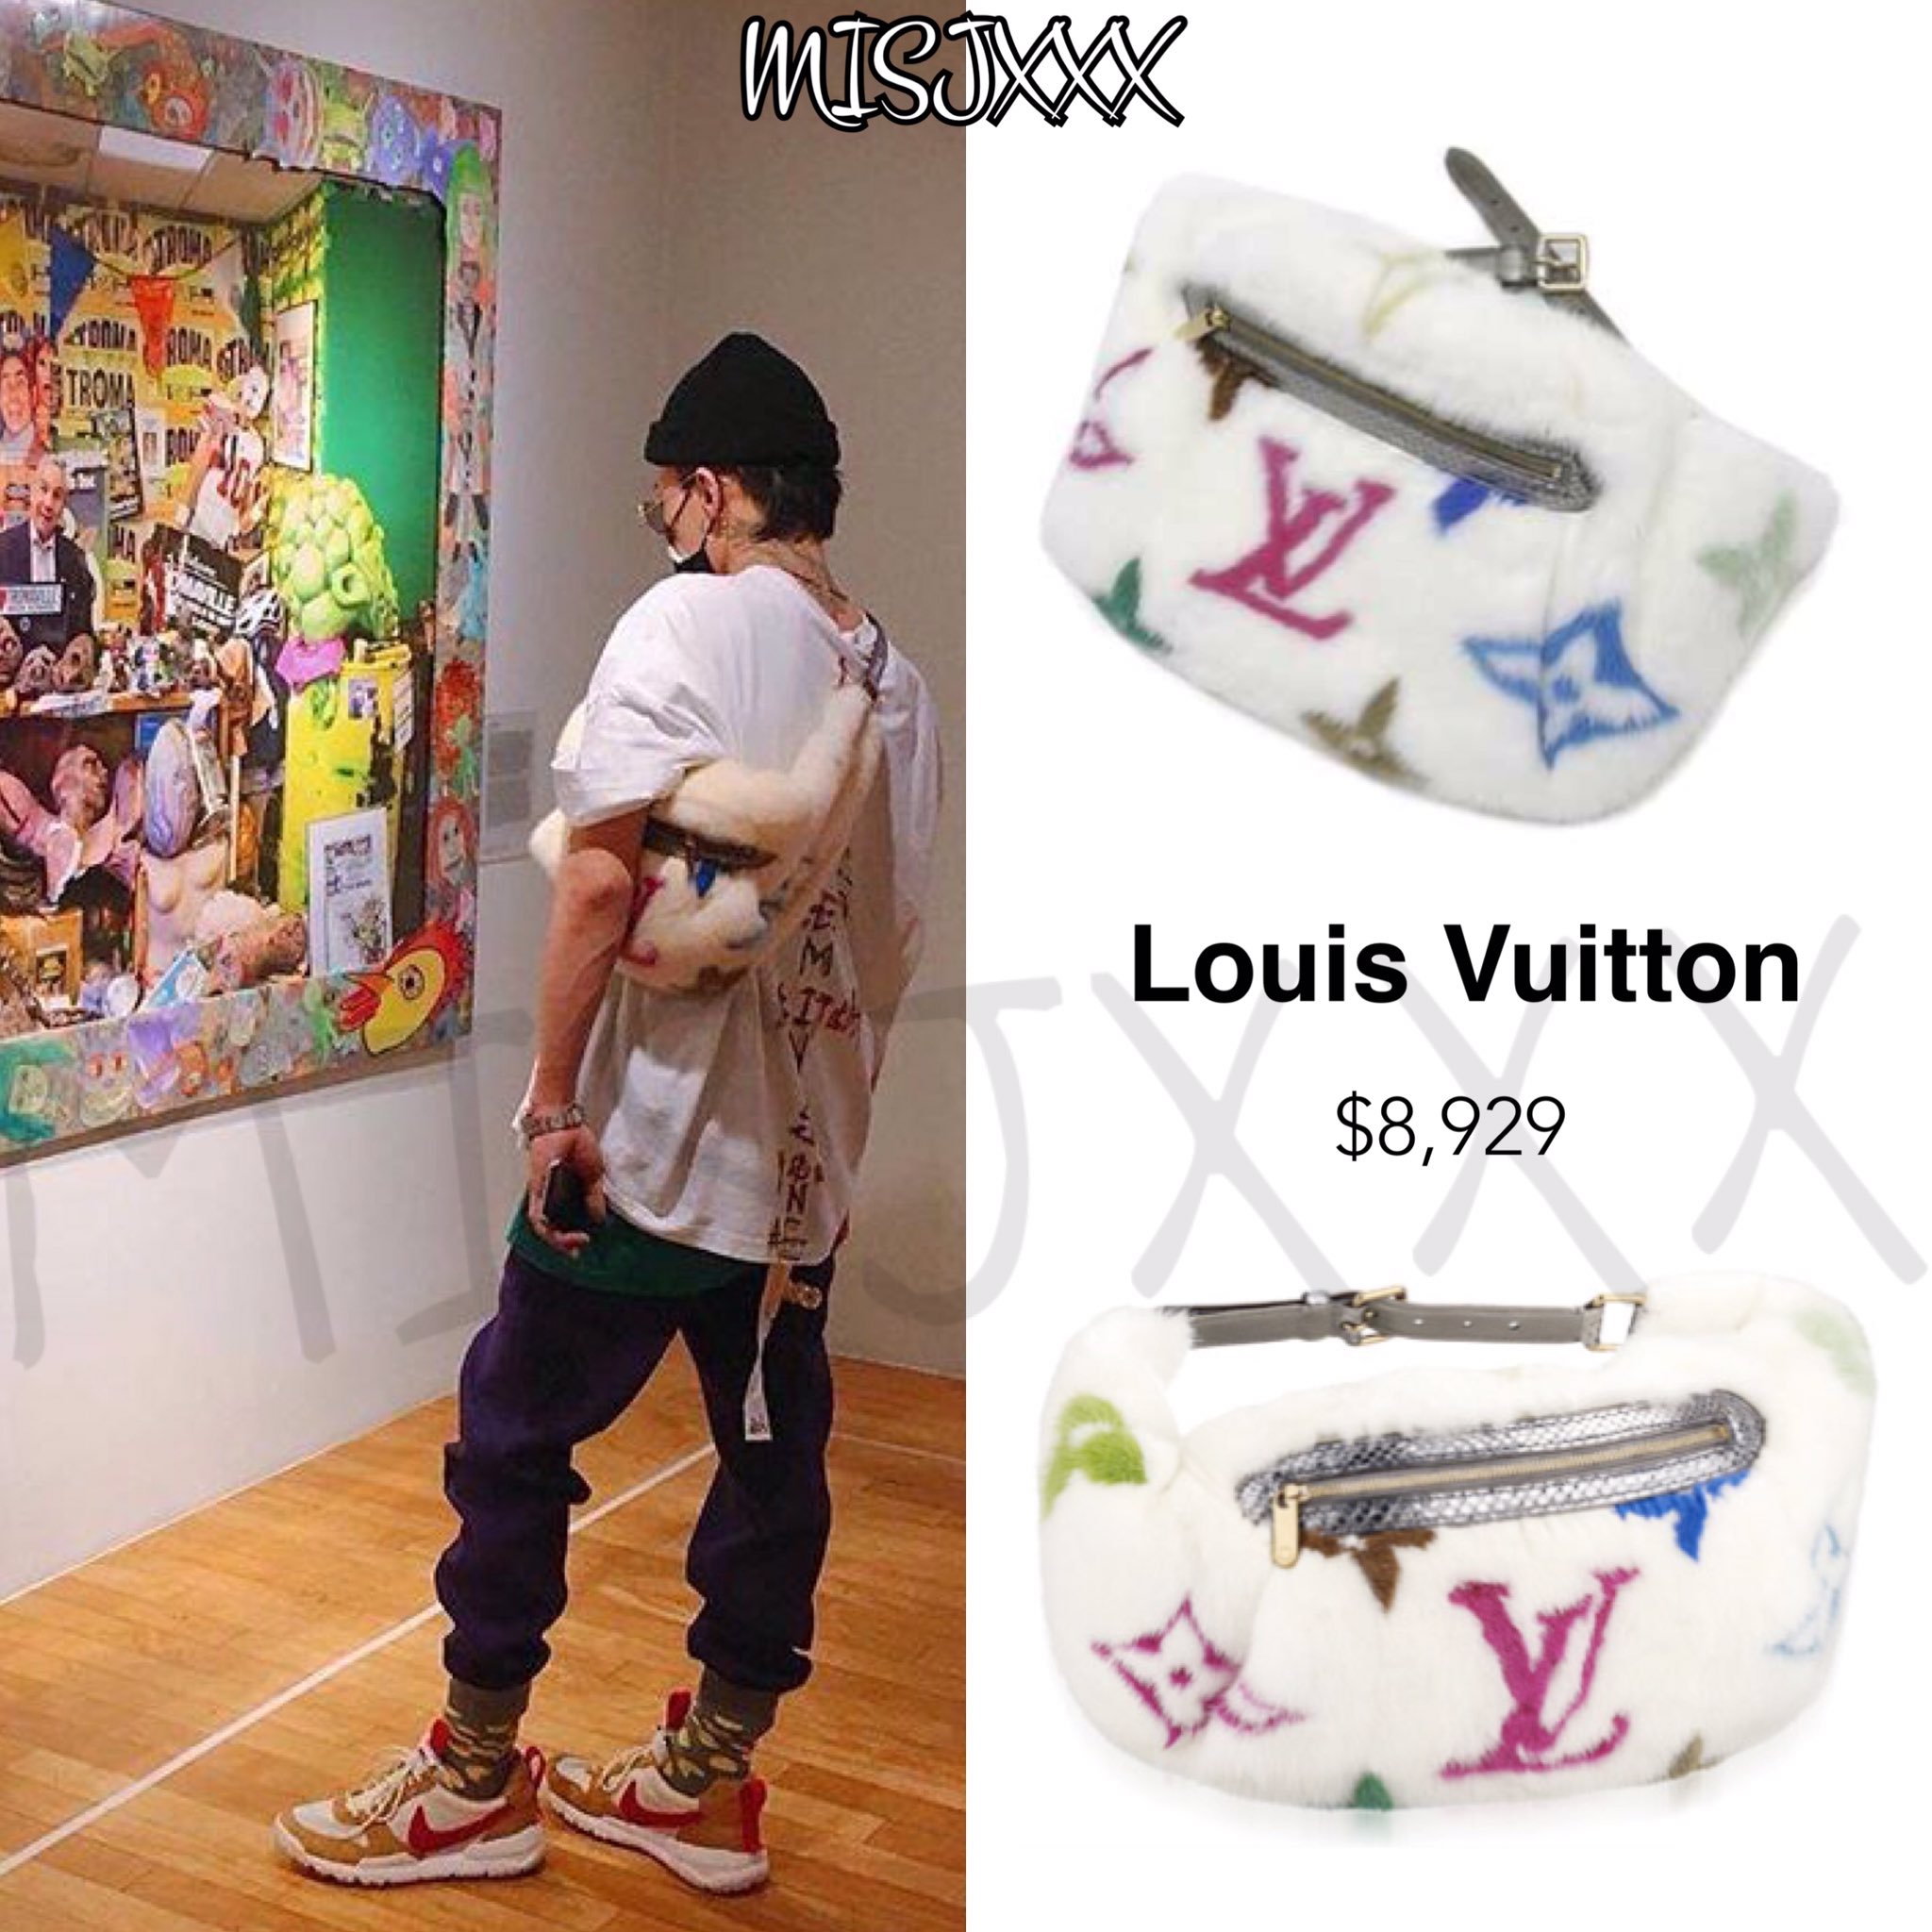 GDSTYLE on X: #GDStyle 👉#LOUISVUITTON limited edition rare mink fur  multi-colored bags.($8,929) #gdragon #gd  / X